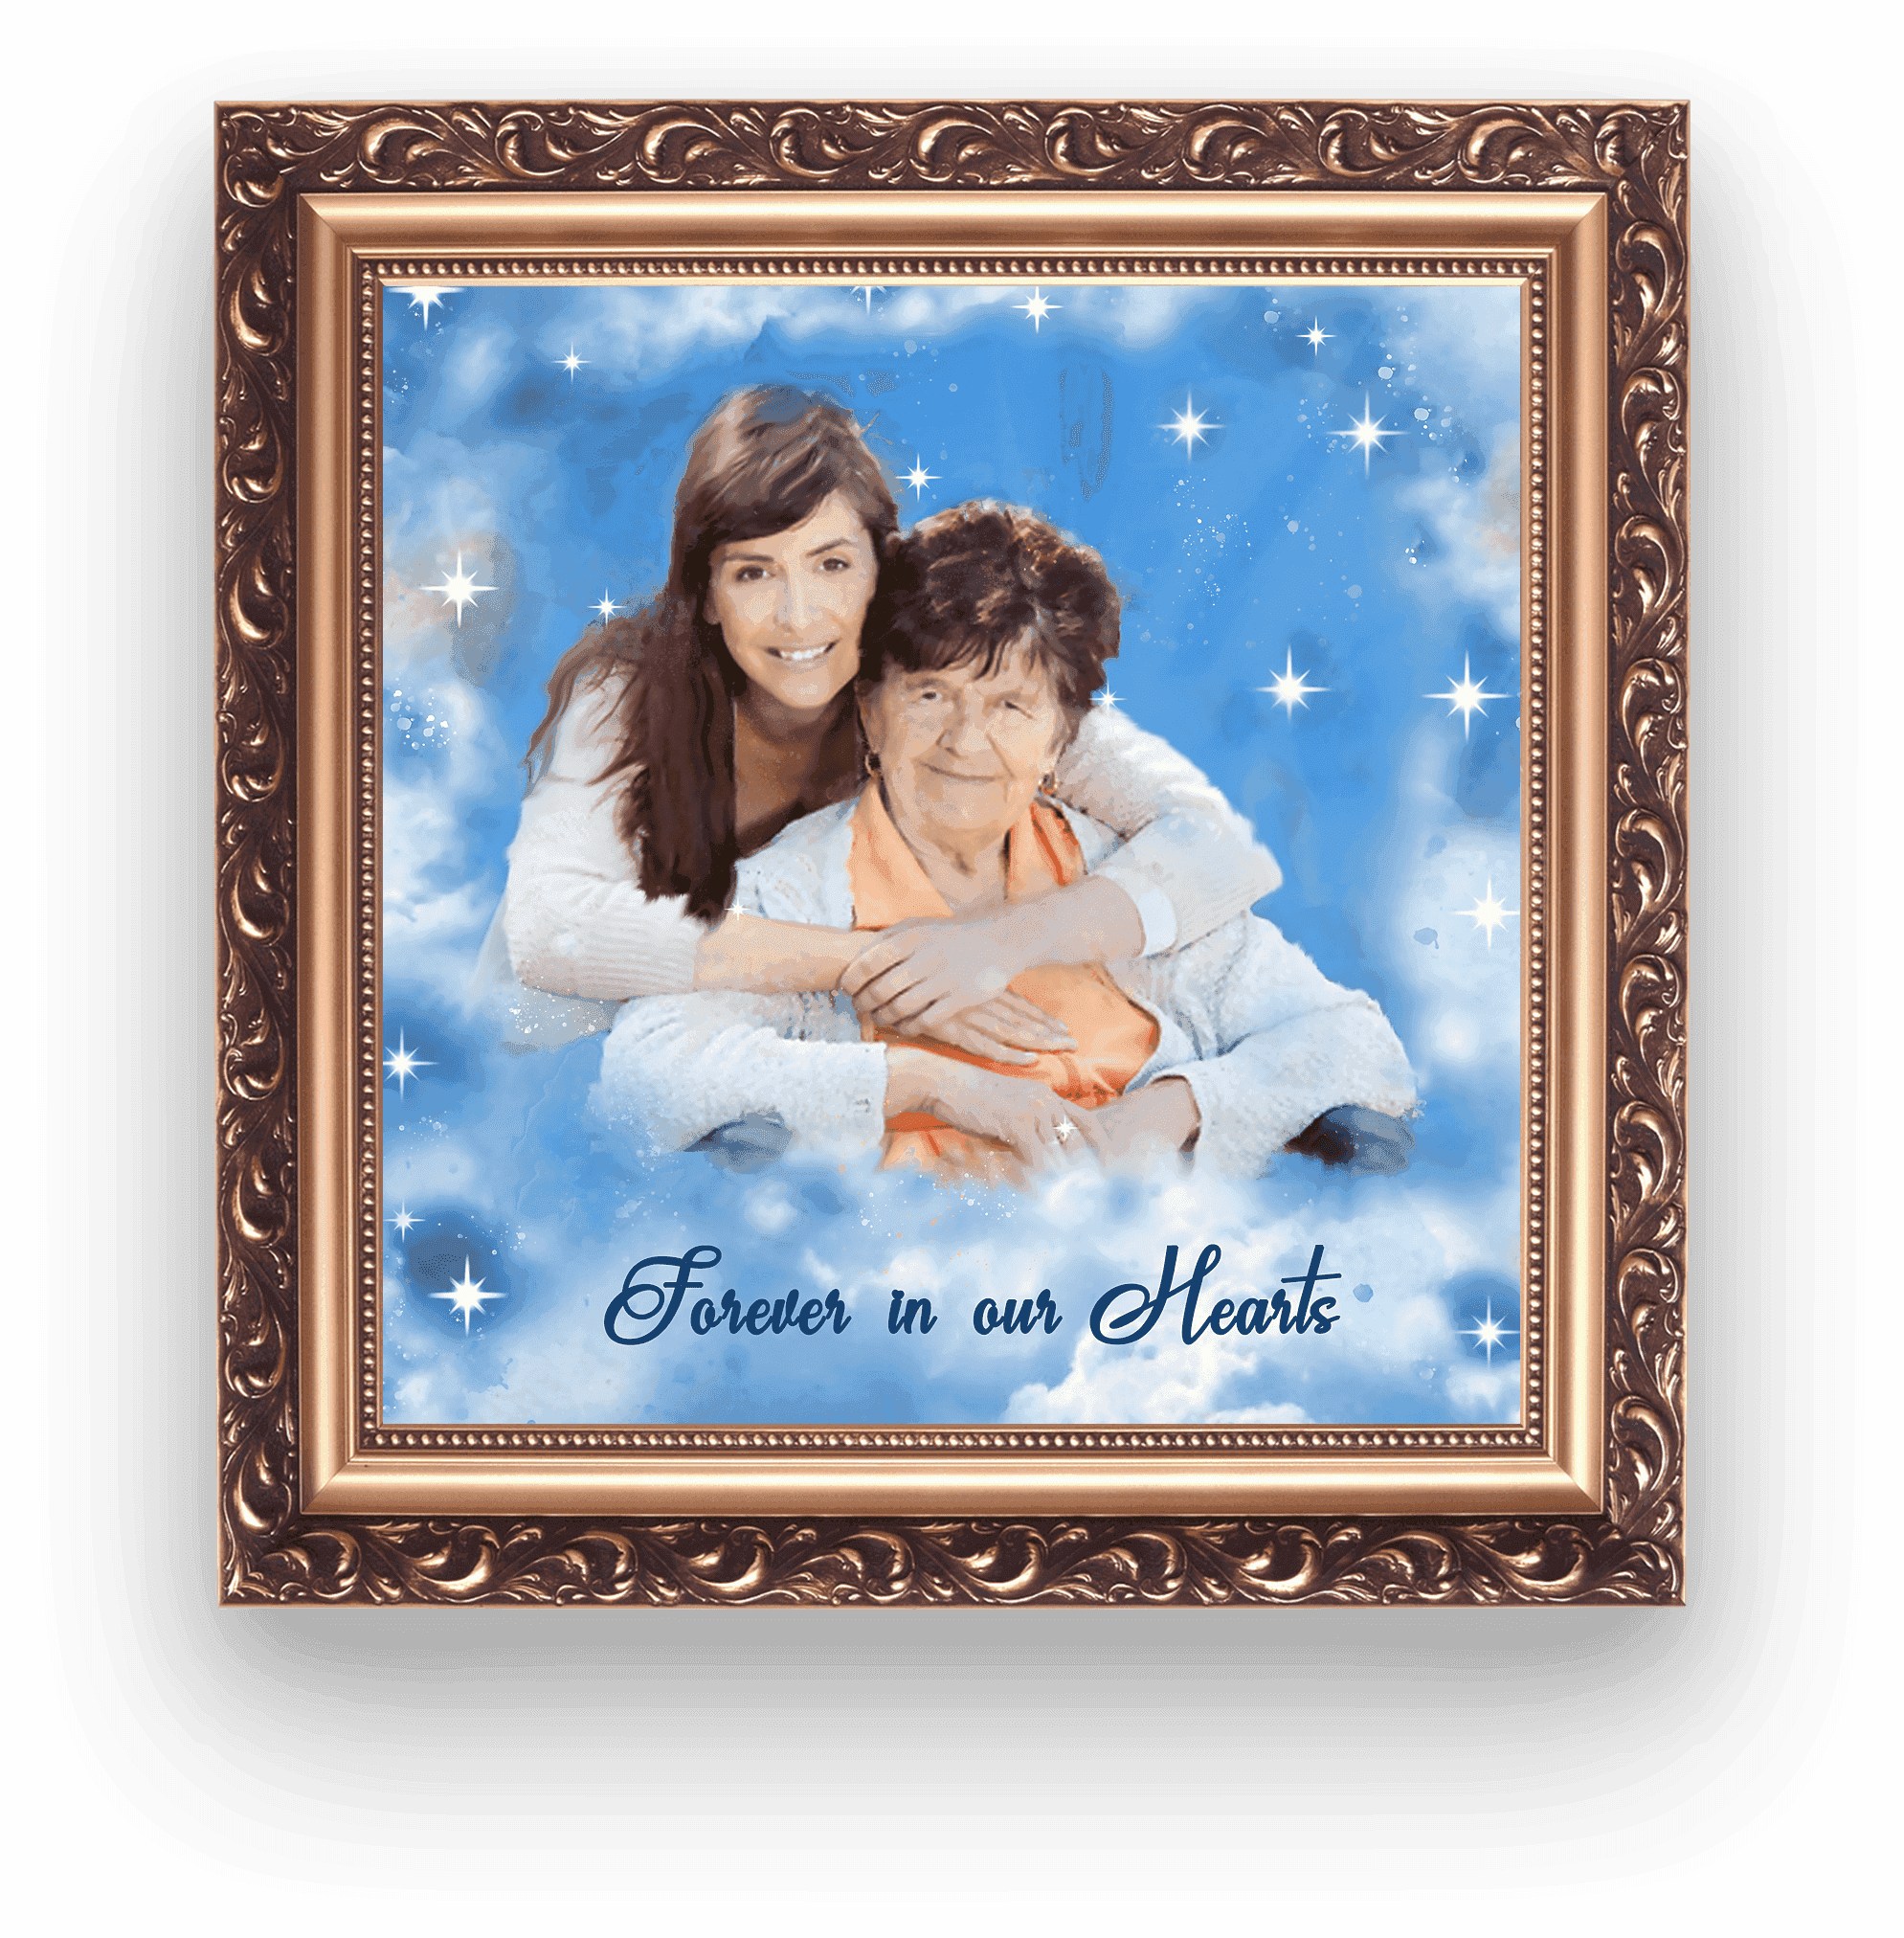 Painting of Loved Ones | Custom Portraits from Photo | Wall Art - FromPicToArt